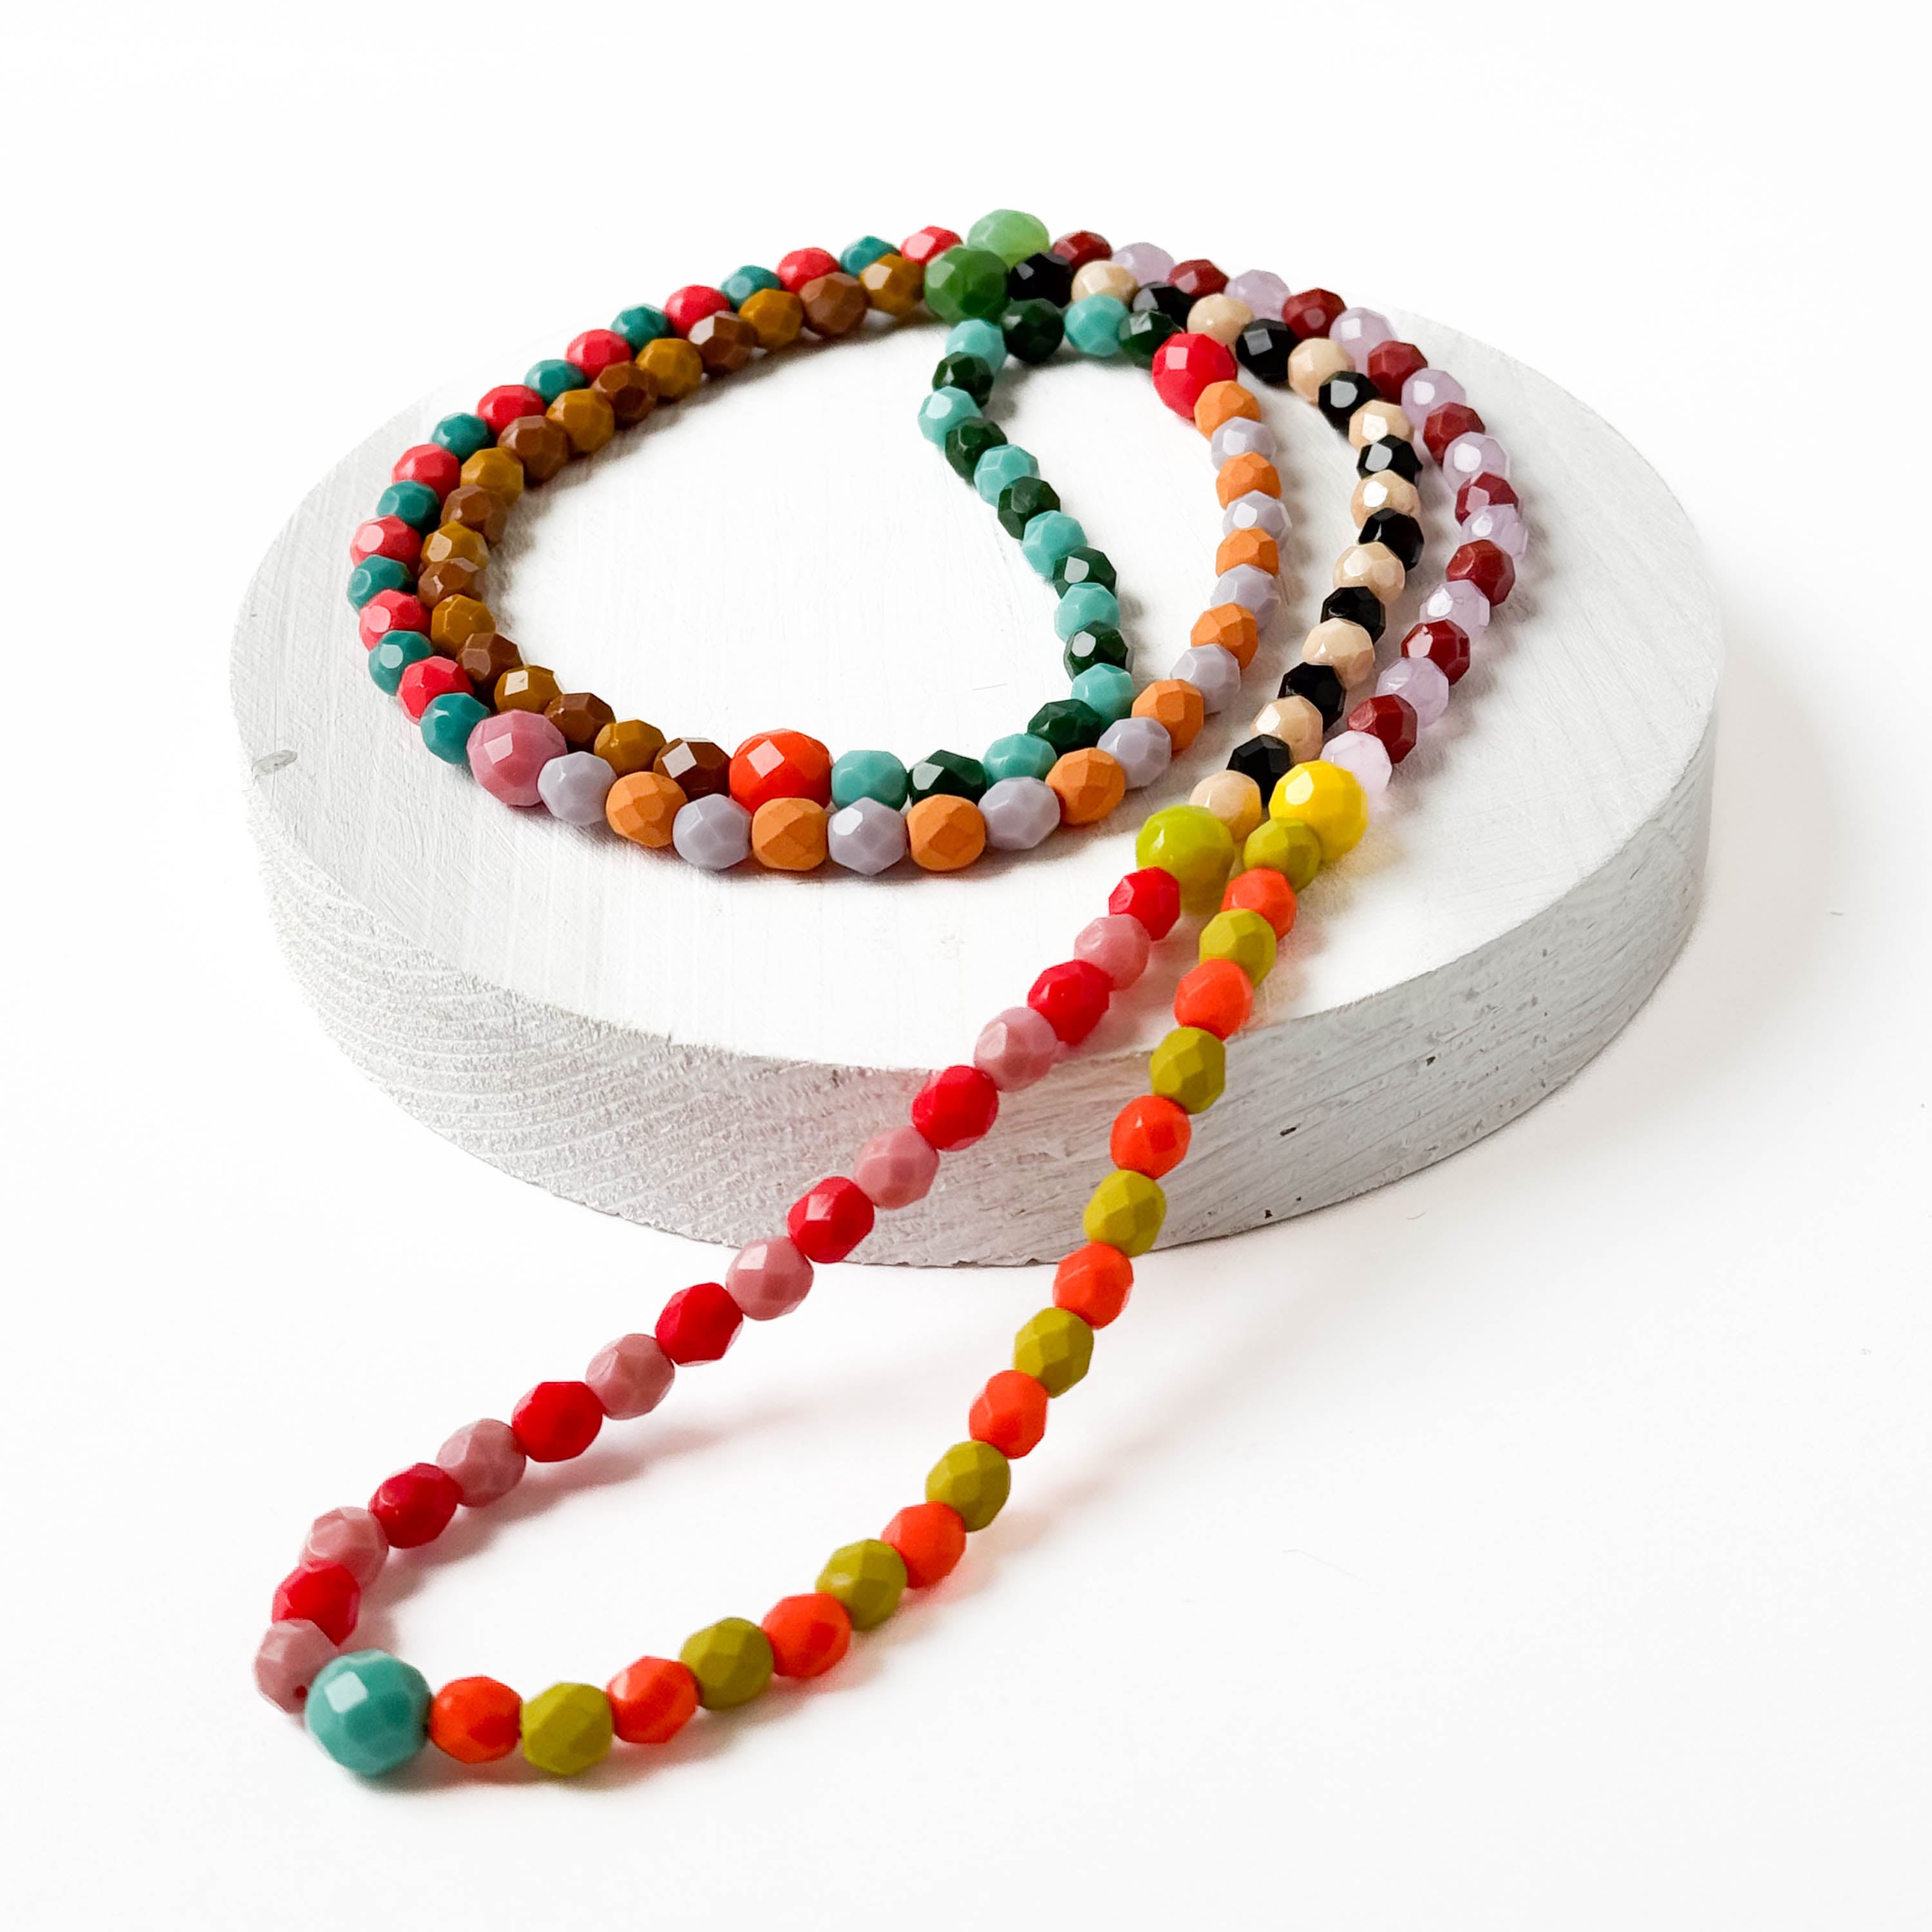 Colorful Seed Bead Necklace | Dee Ruel Jewelry